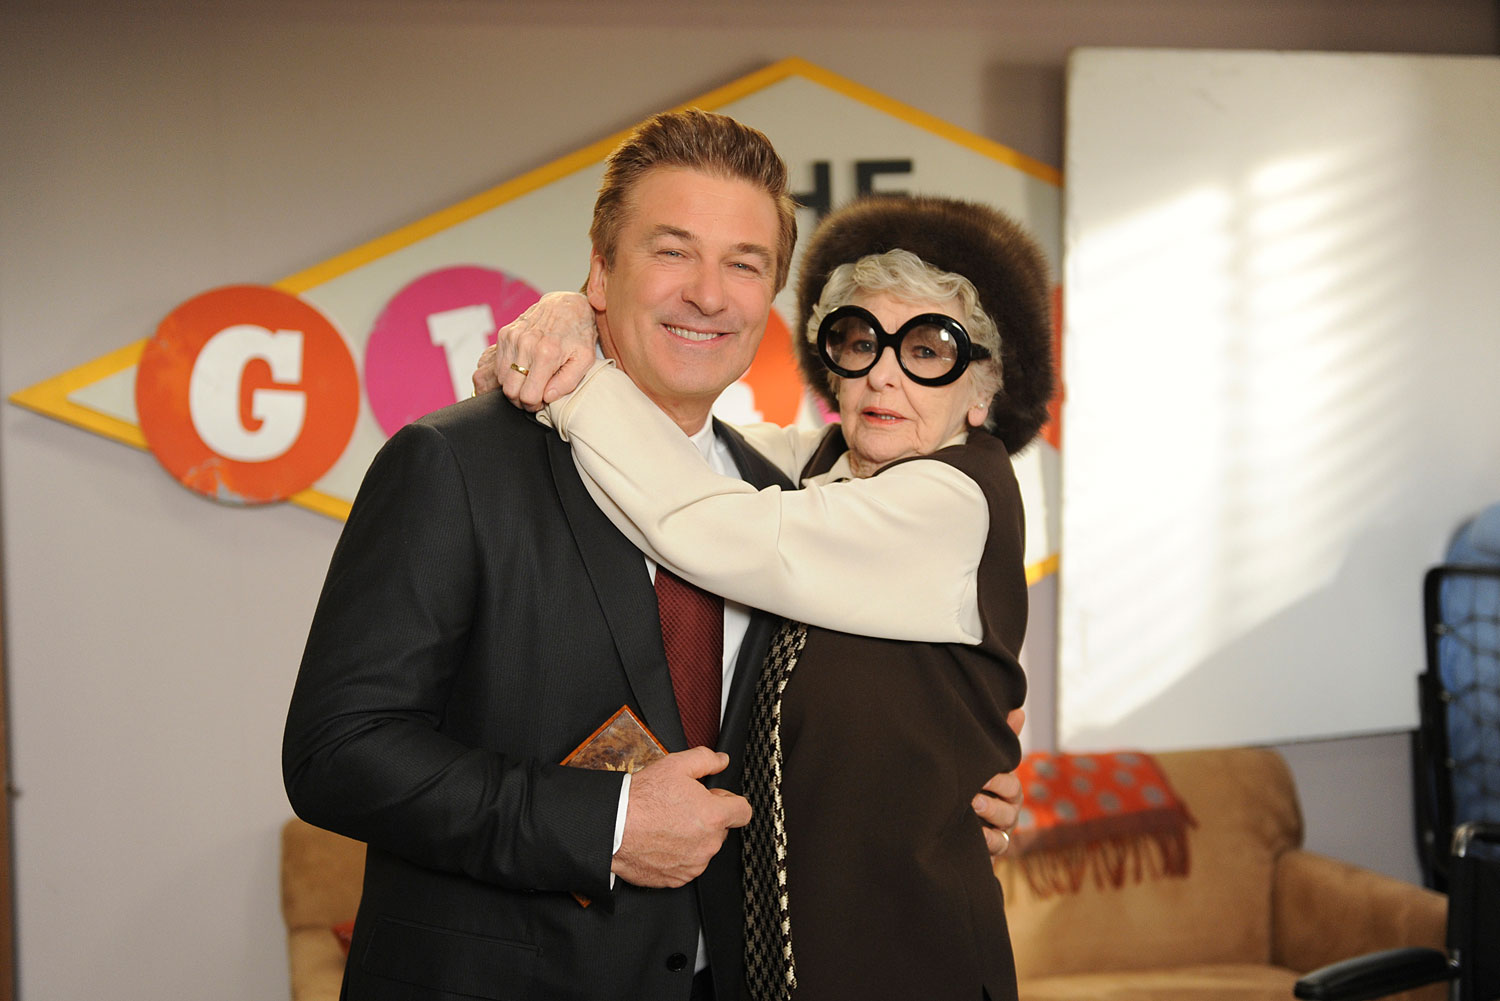 Alec Baldwin as Jack Donaghy and Elaine Stritch as Colleen Donaghy in 30 Rock.